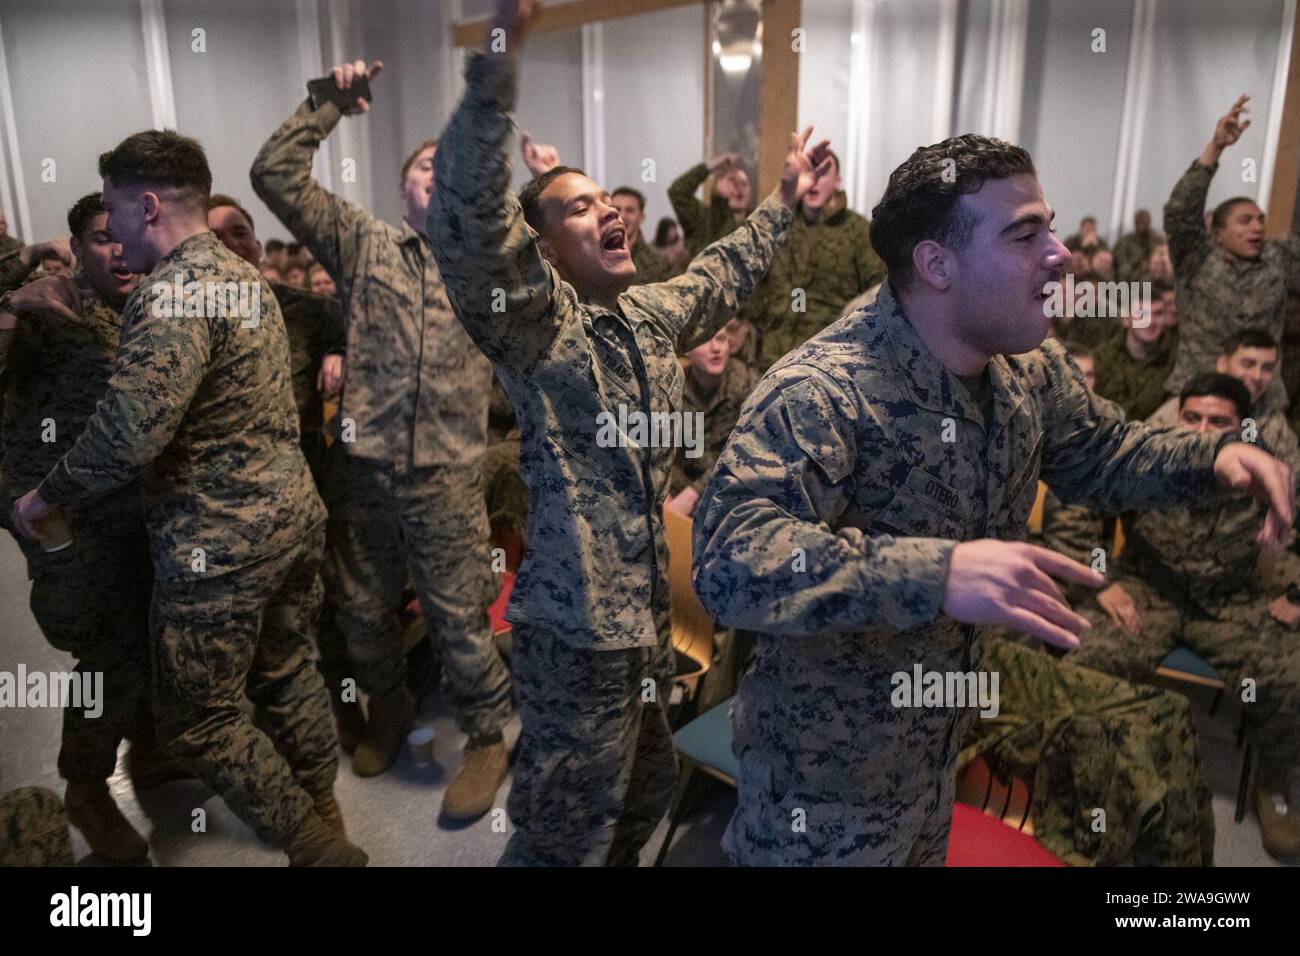 US military forces. Marine Corps Gen. Joe Dunford, chairman of the Joint Chiefs of Staff, meets with deployed service members in Vaernes, Norway Dec. 21, 2018. Dunford, along with USO entertainers, visited service members who are away from home during the holidays at various locations. This year’s entertainers include actors Milo Ventimiglia, Wilmer Valderrama, DJ J Dayz, Fittest Man on Earth Matt Fraser, 3-time Olympic Gold Medalist Shaun White, Country Music Singer Kellie Pickler, and comedian Jessiemae Peluso. (DoD photo by Navy Petty Officer 1st Class Dominique A. Pineiro) Stock Photo